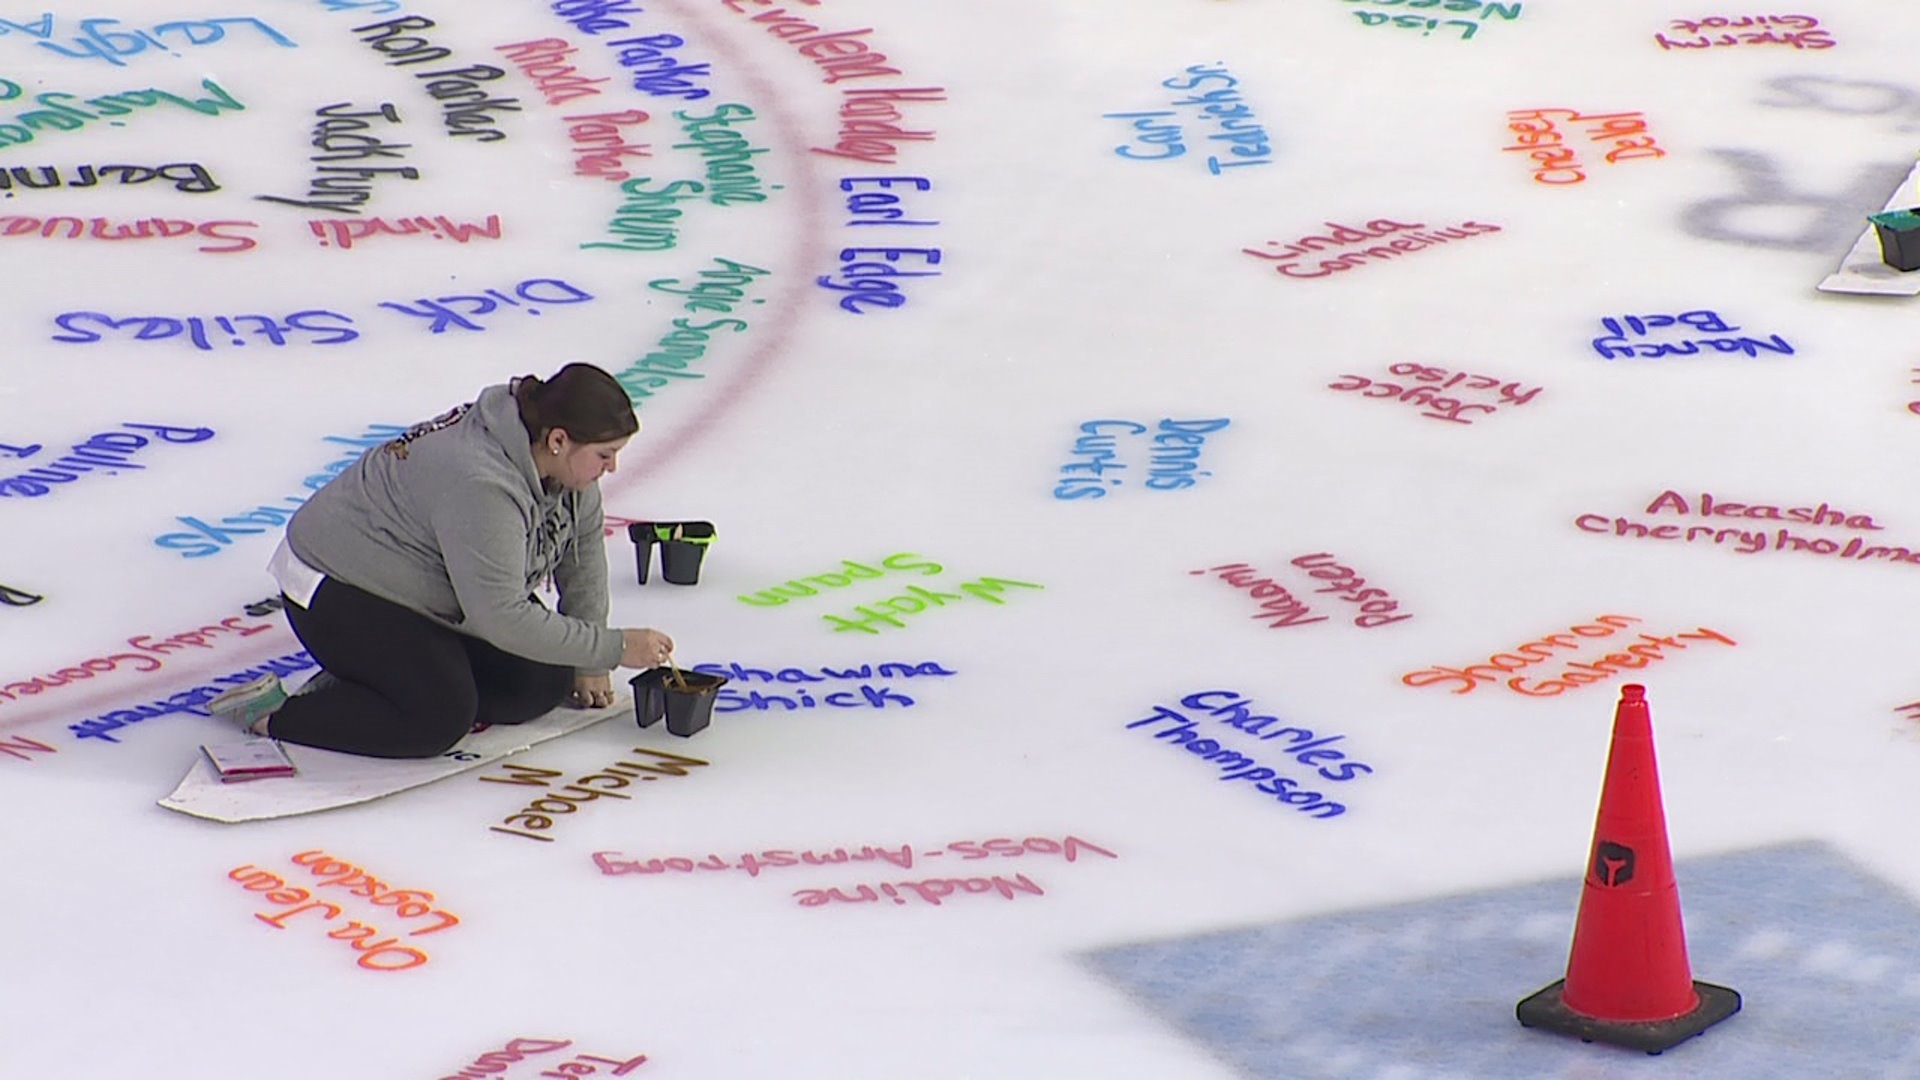 Families take to the ice to remember loved ones touched by cancer